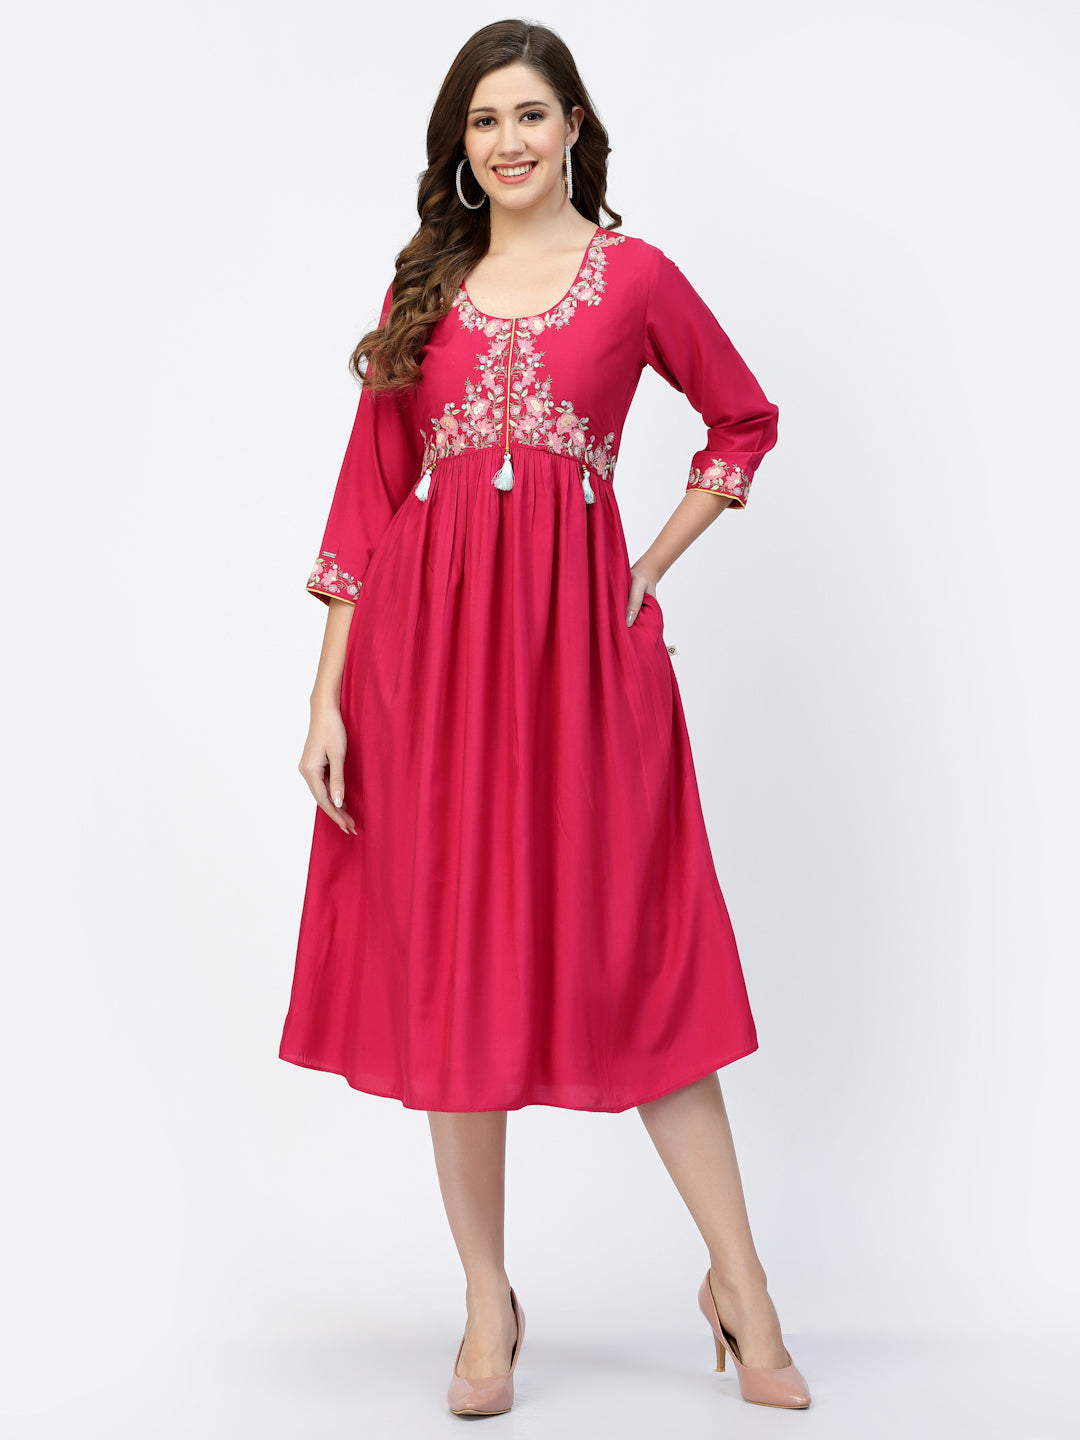 Rani Pink Fit & Flared Embroidered Dress - ARH1697